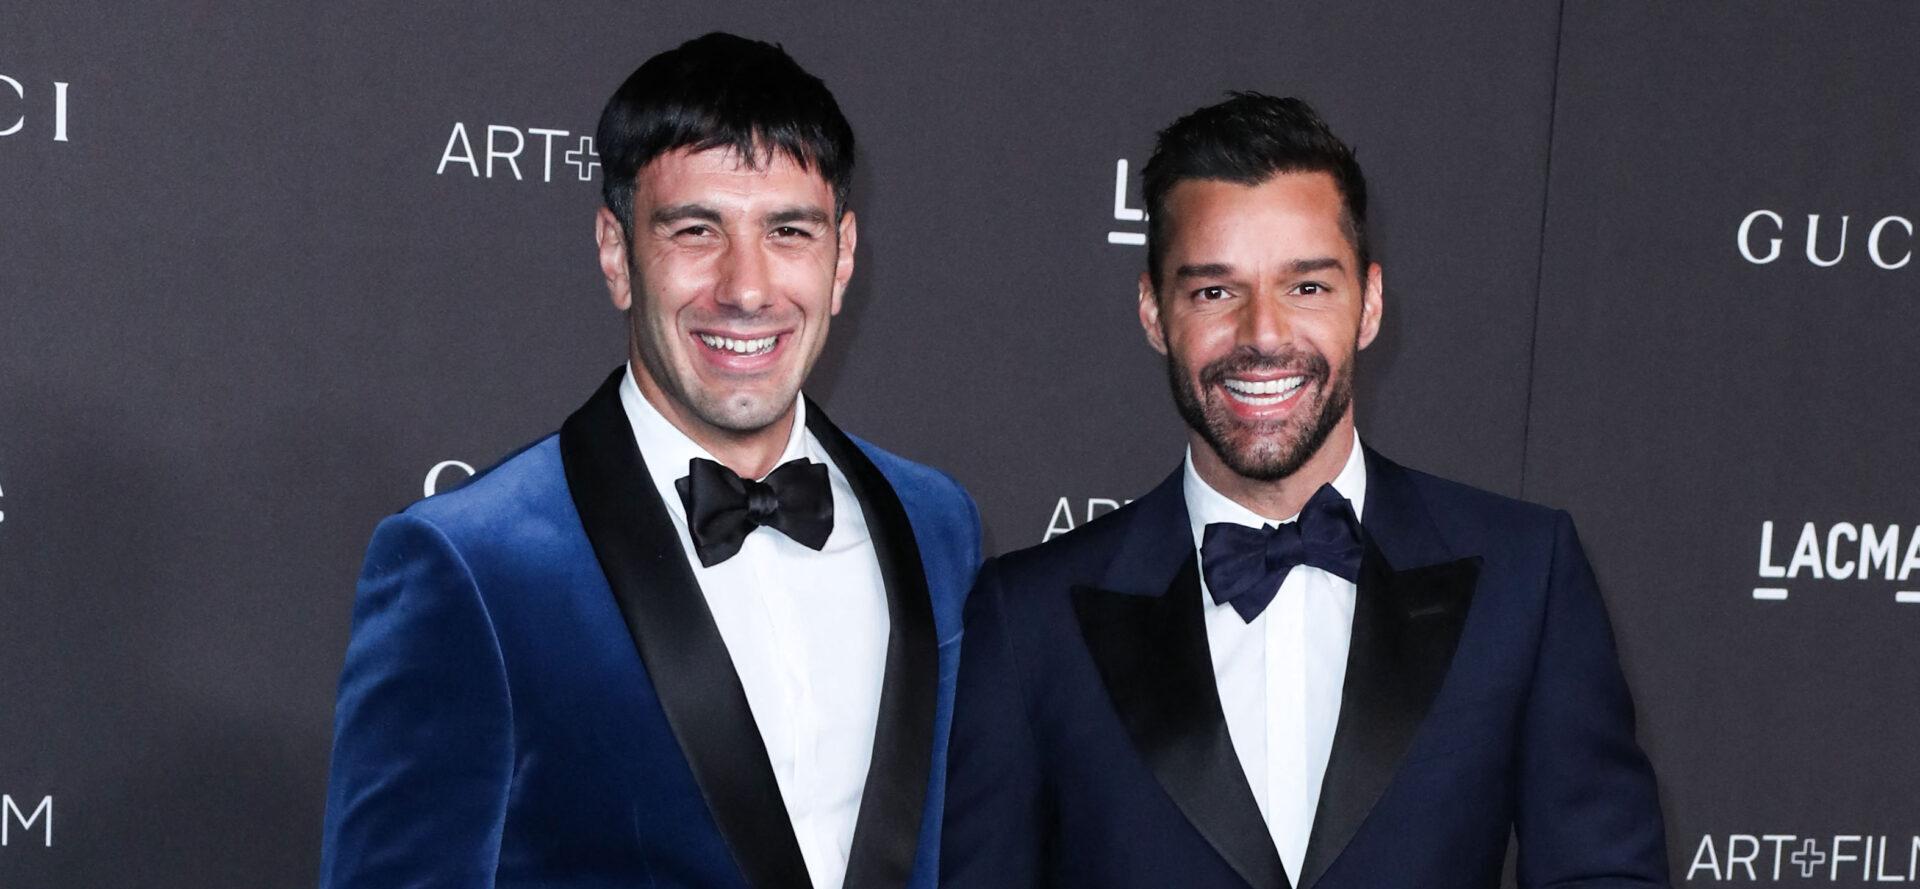 Ricky Martin And Husband Jwan Yosef SPLIT After 6 Years Of Marriage